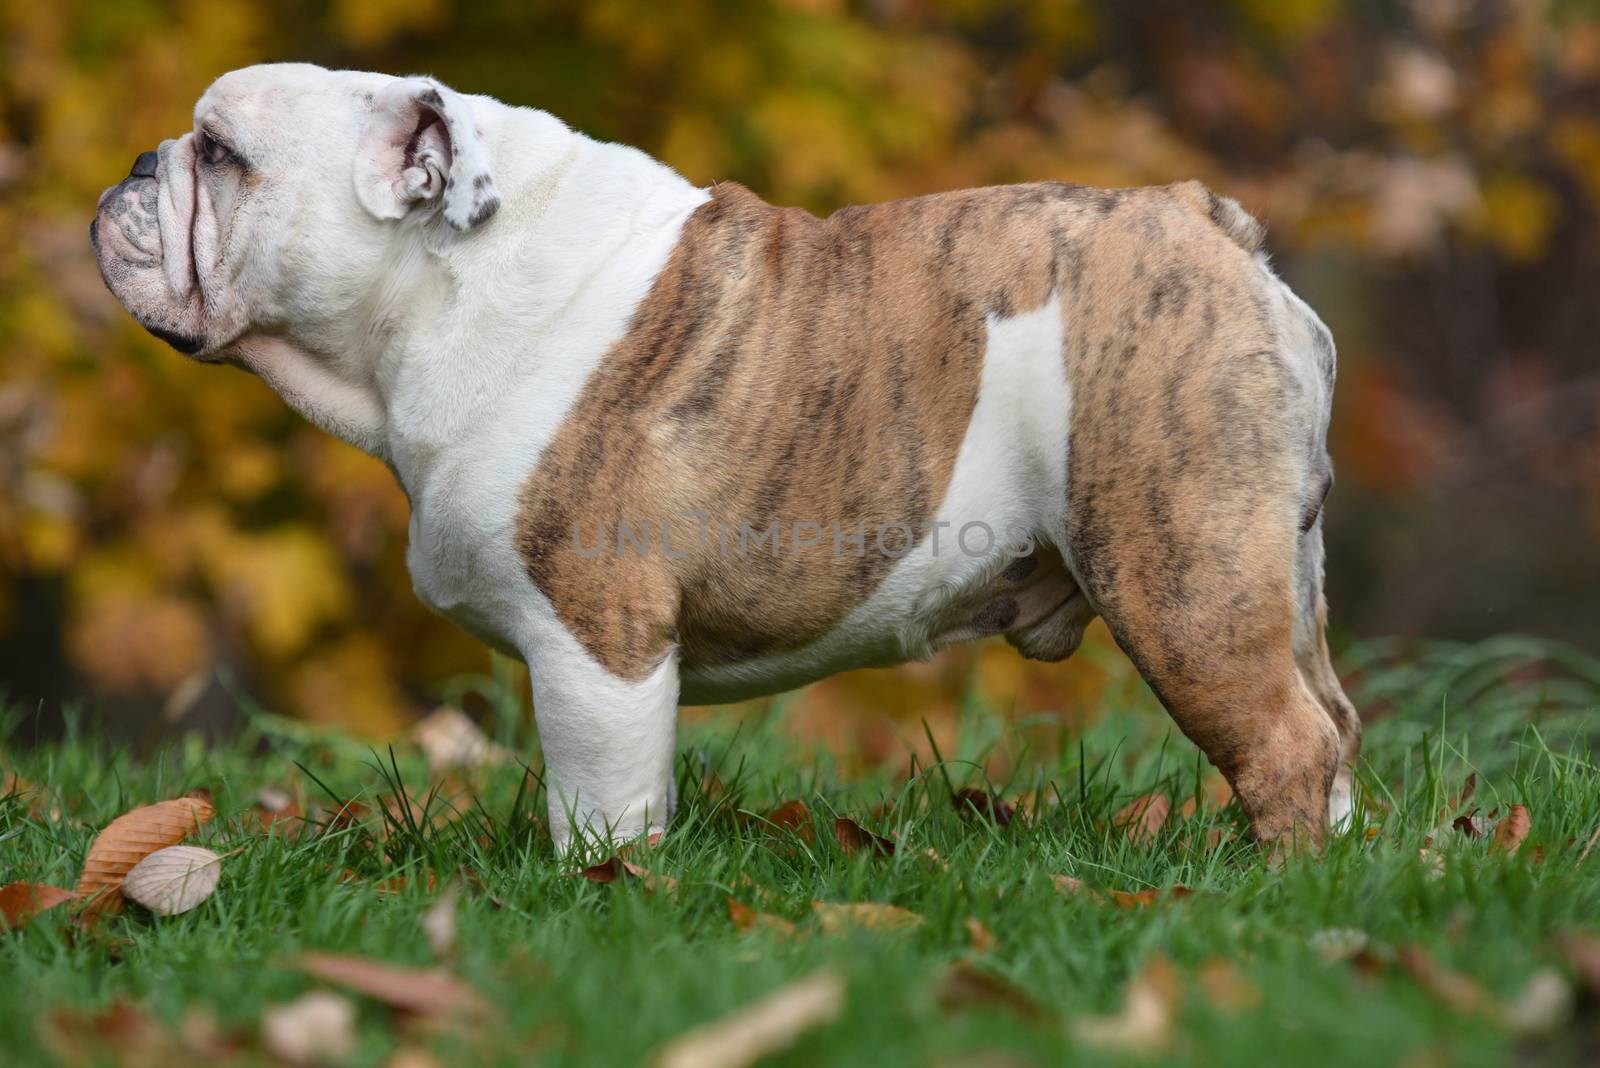 english bulldog, dog, canine, pet, purebred, outside, autumn, outdoors, grass, woods, trees, standing, animal, standing, brindle,